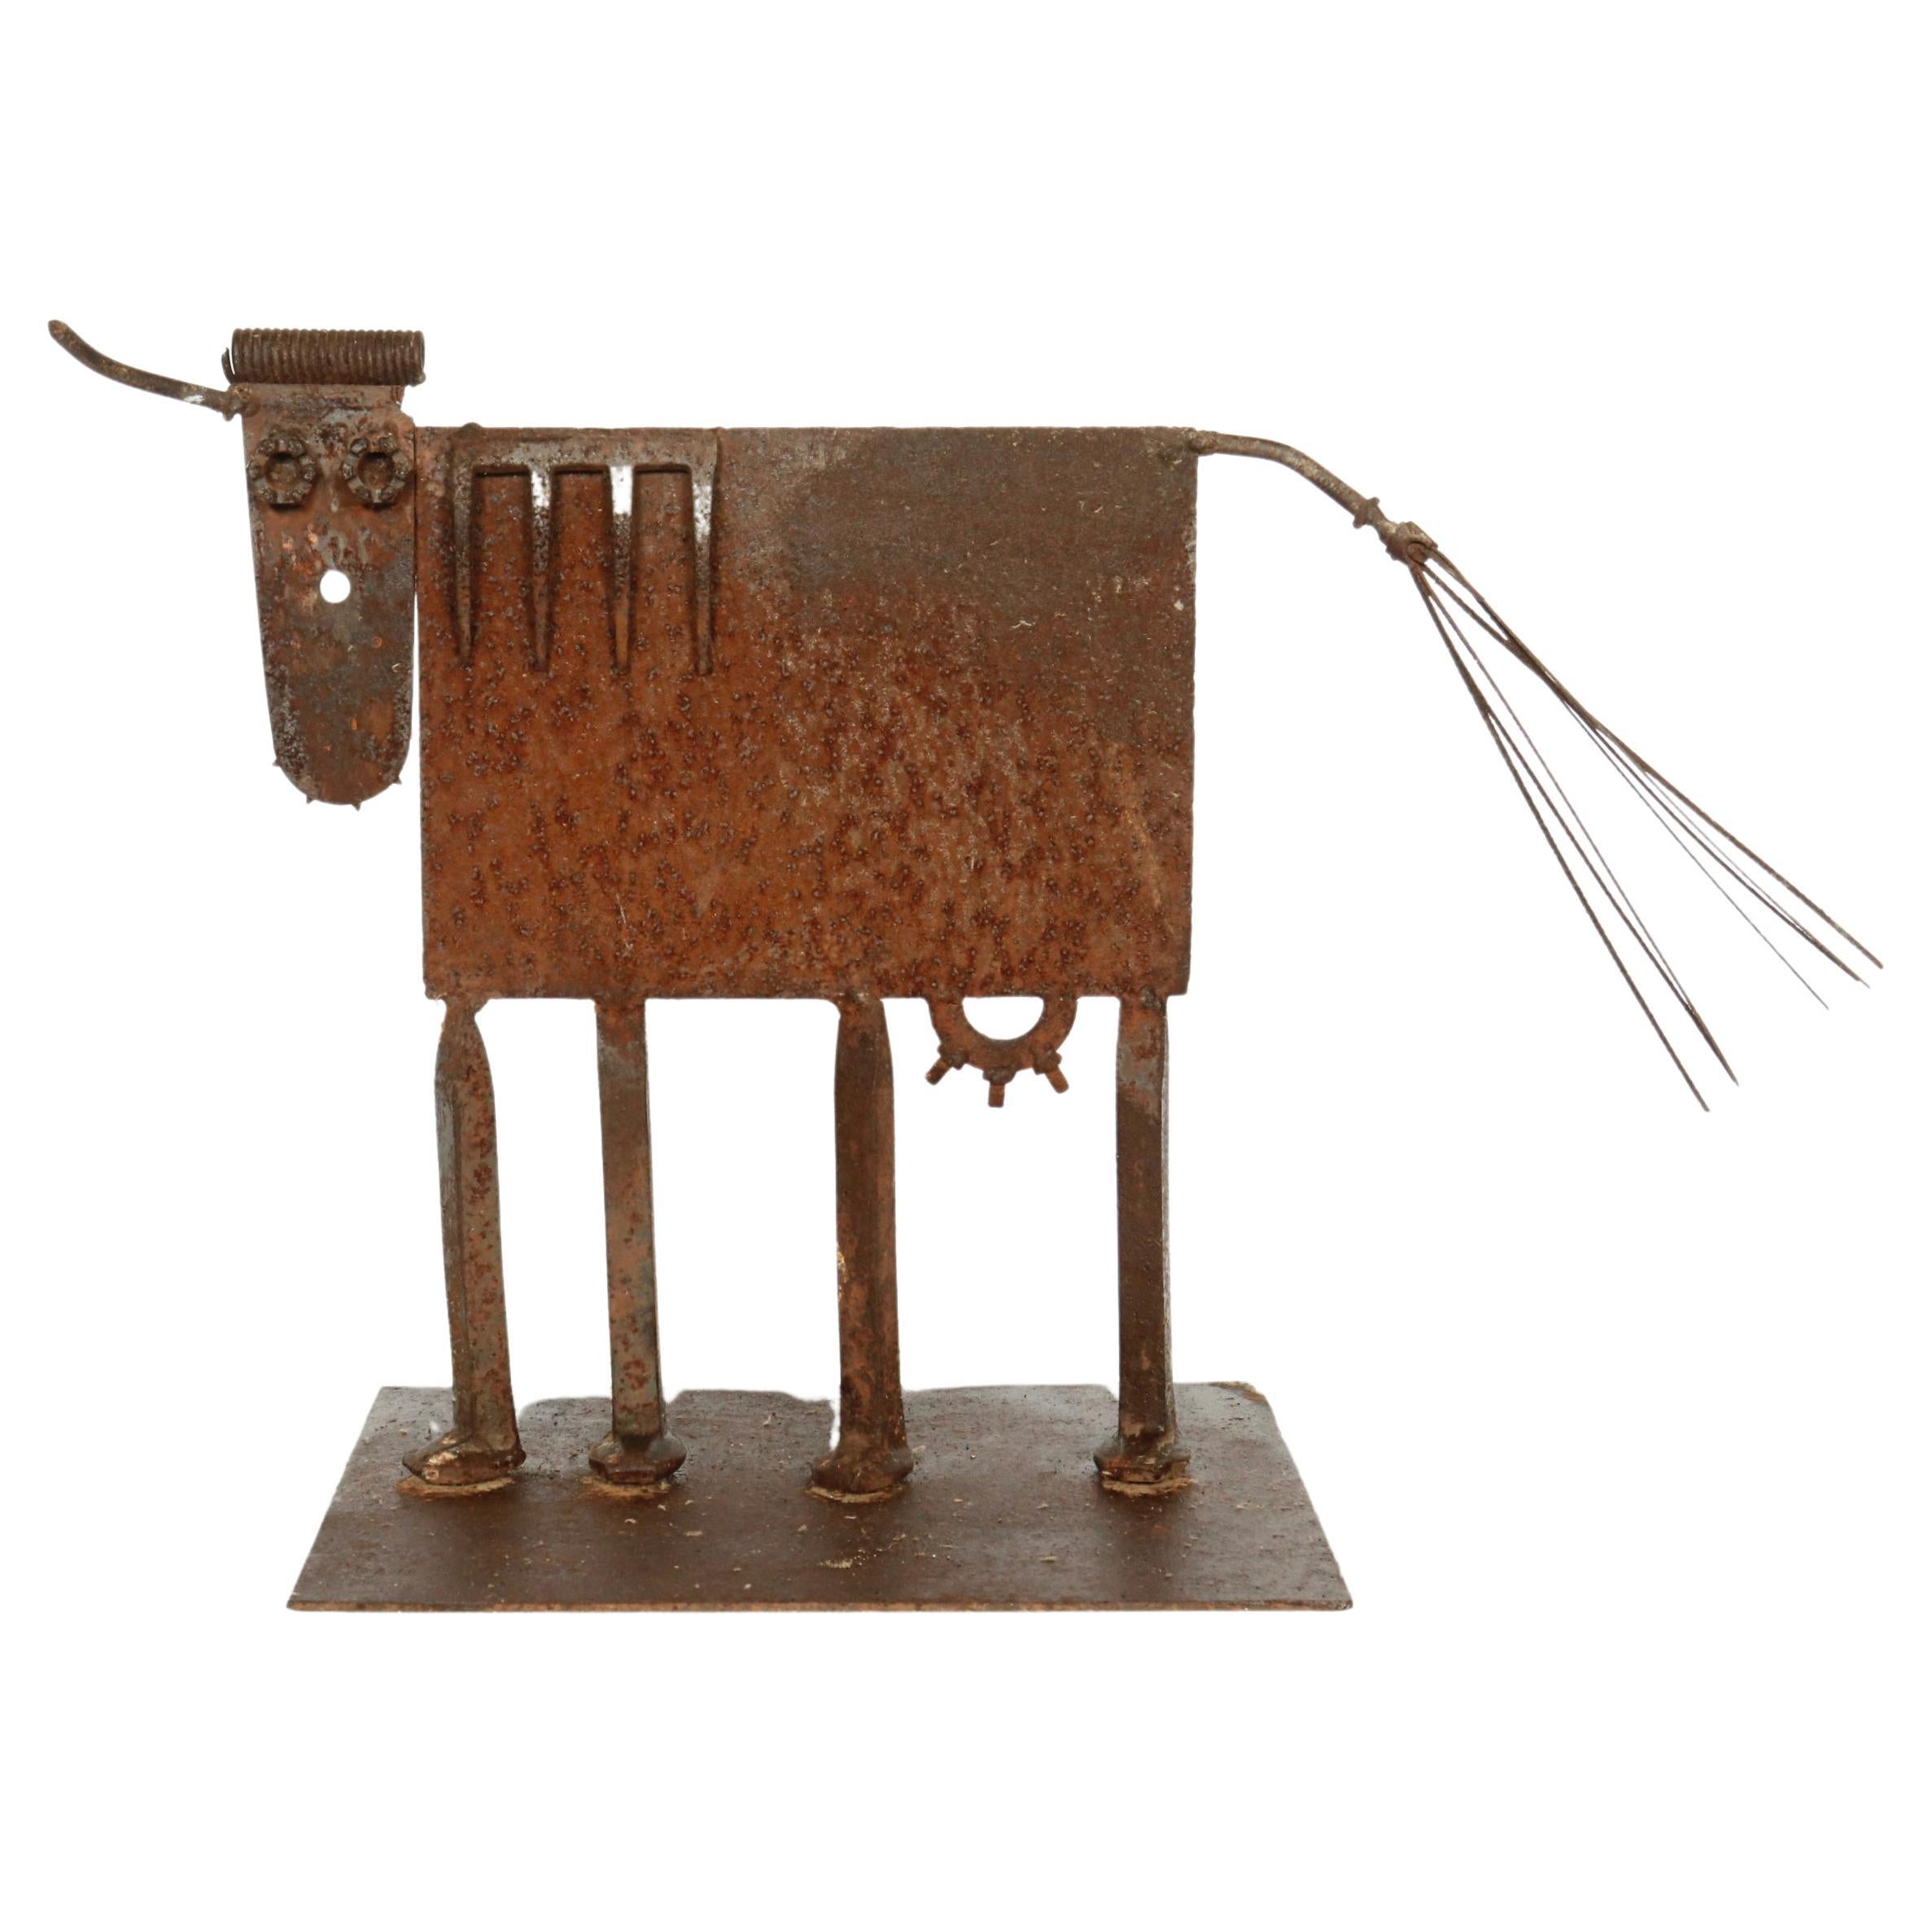 Dan Whitbeck Iron Cattle Sculpture For Sale